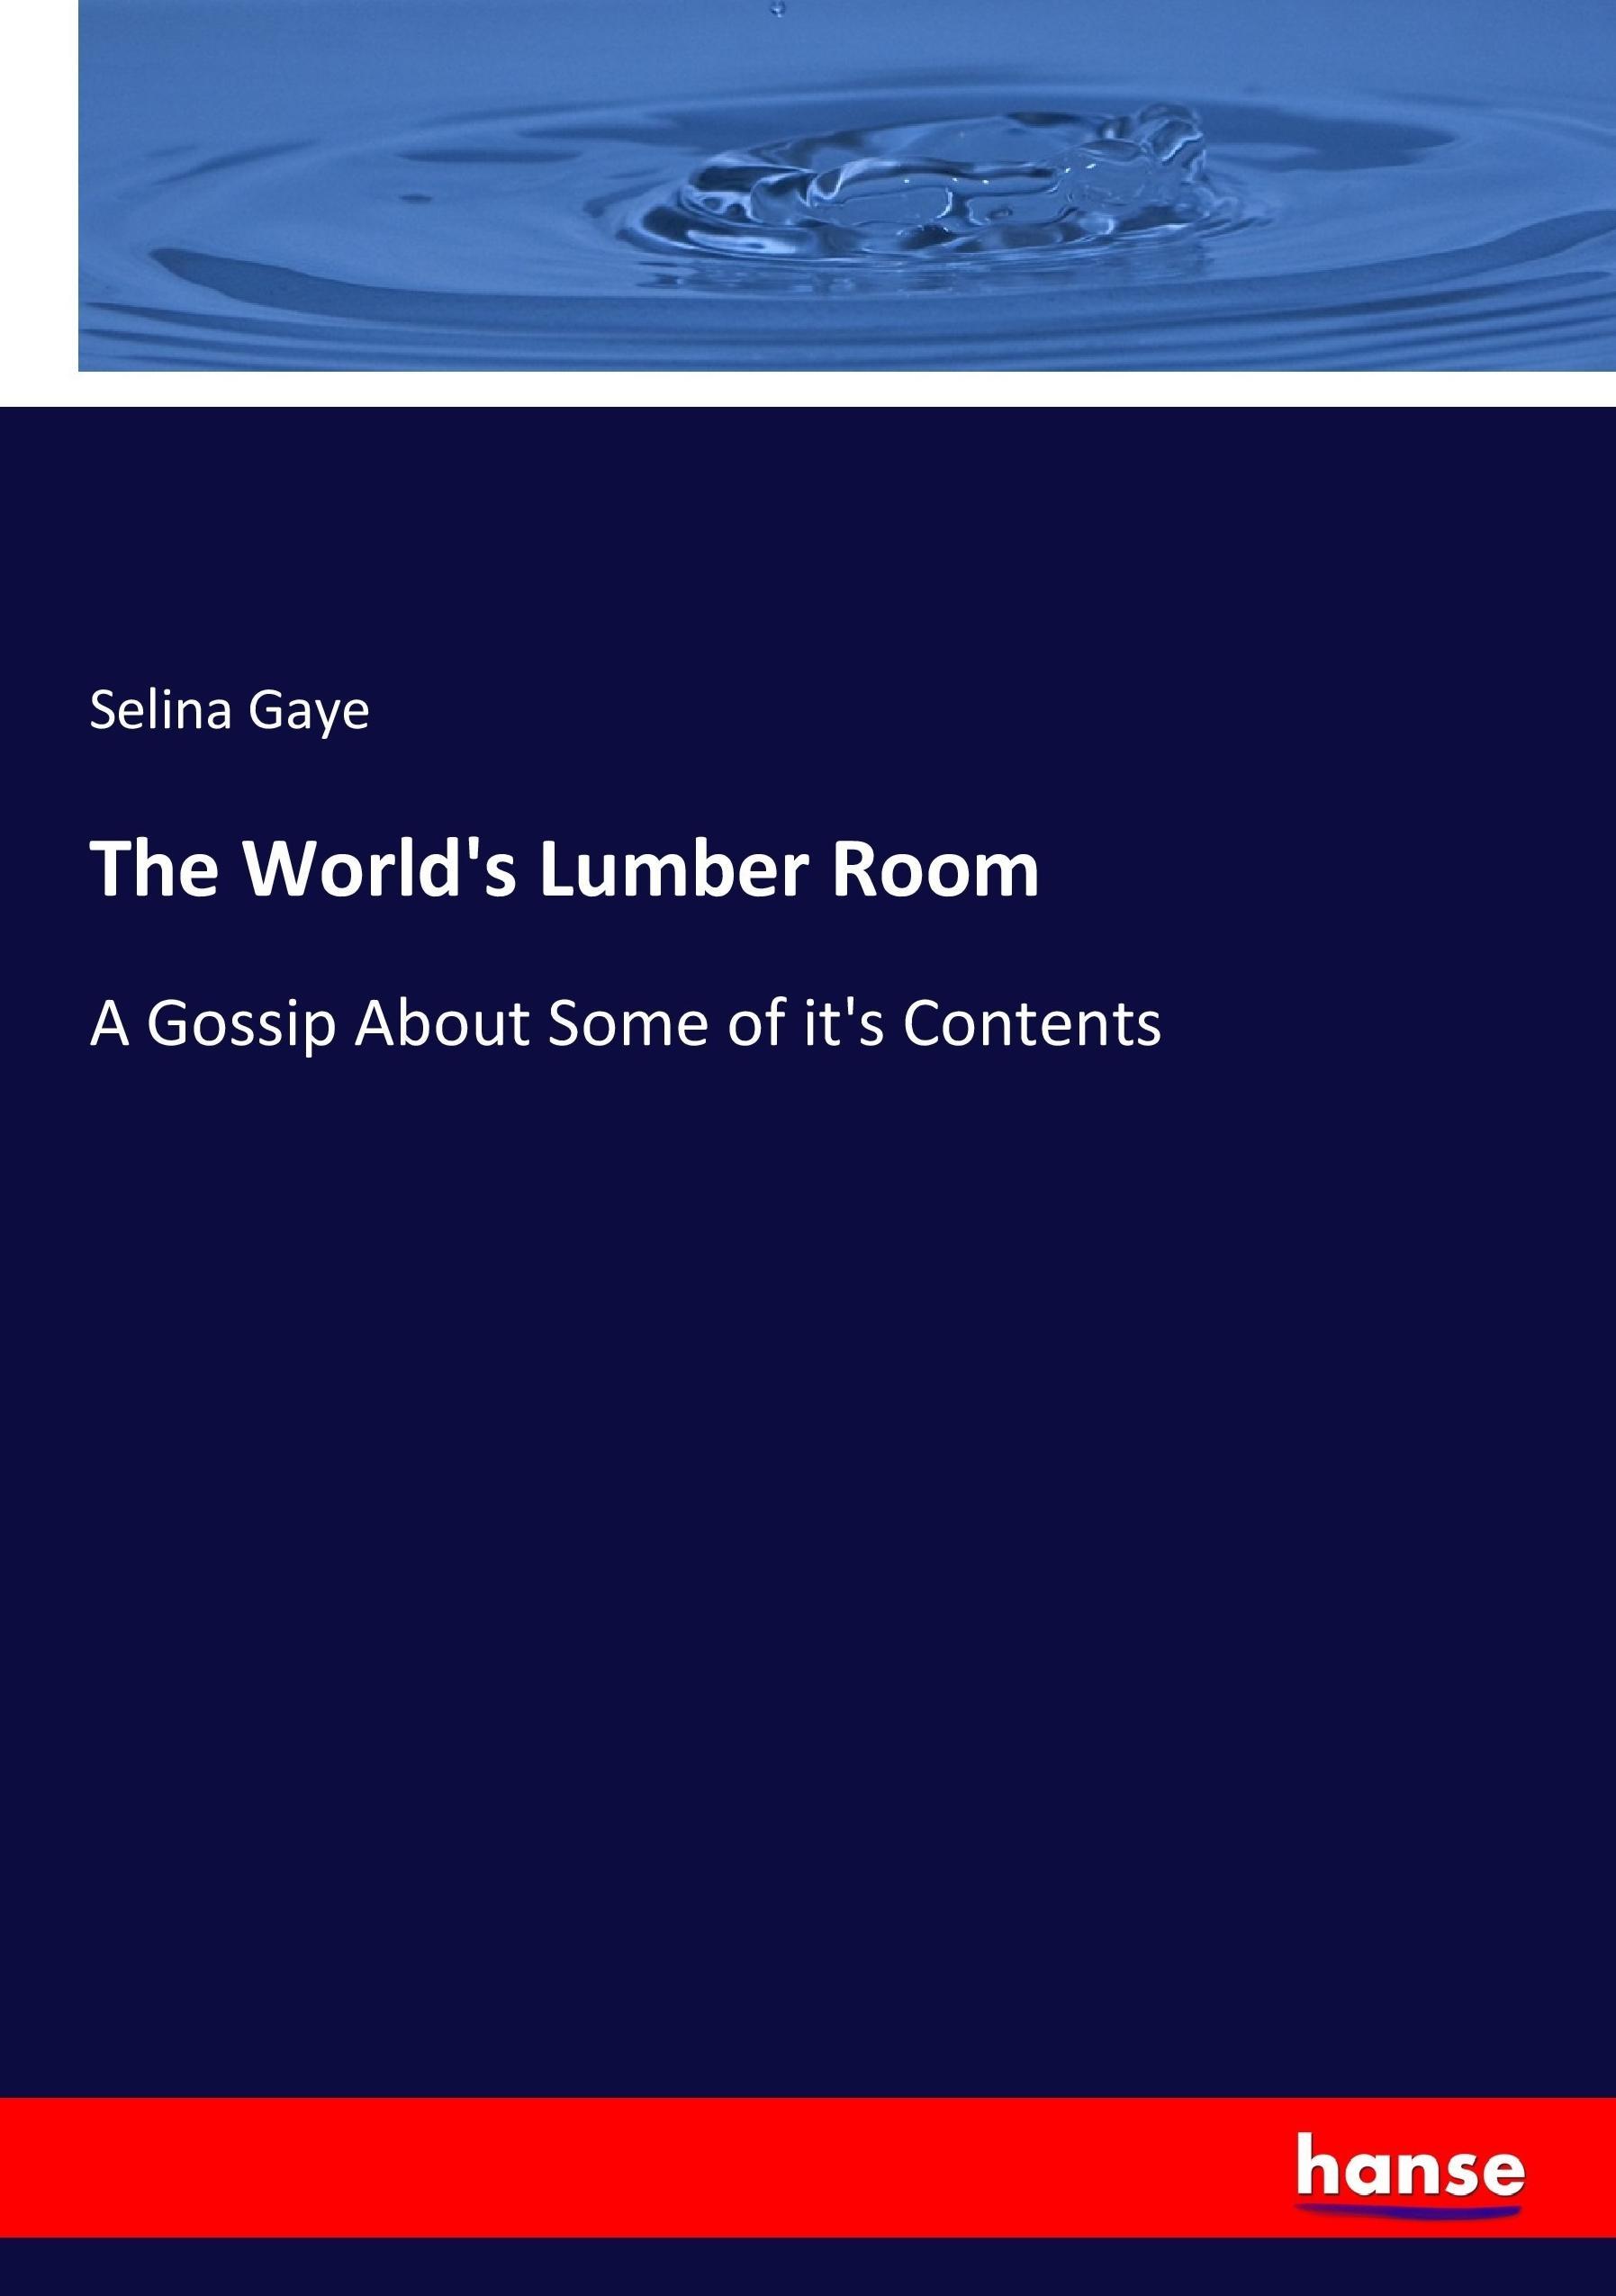 The World's Lumber Room | A Gossip About Some of it's Contents | Selina Gaye | Taschenbuch | Paperback | 332 S. | Englisch | 2017 | hansebooks | EAN 9783744717236 - Gaye, Selina